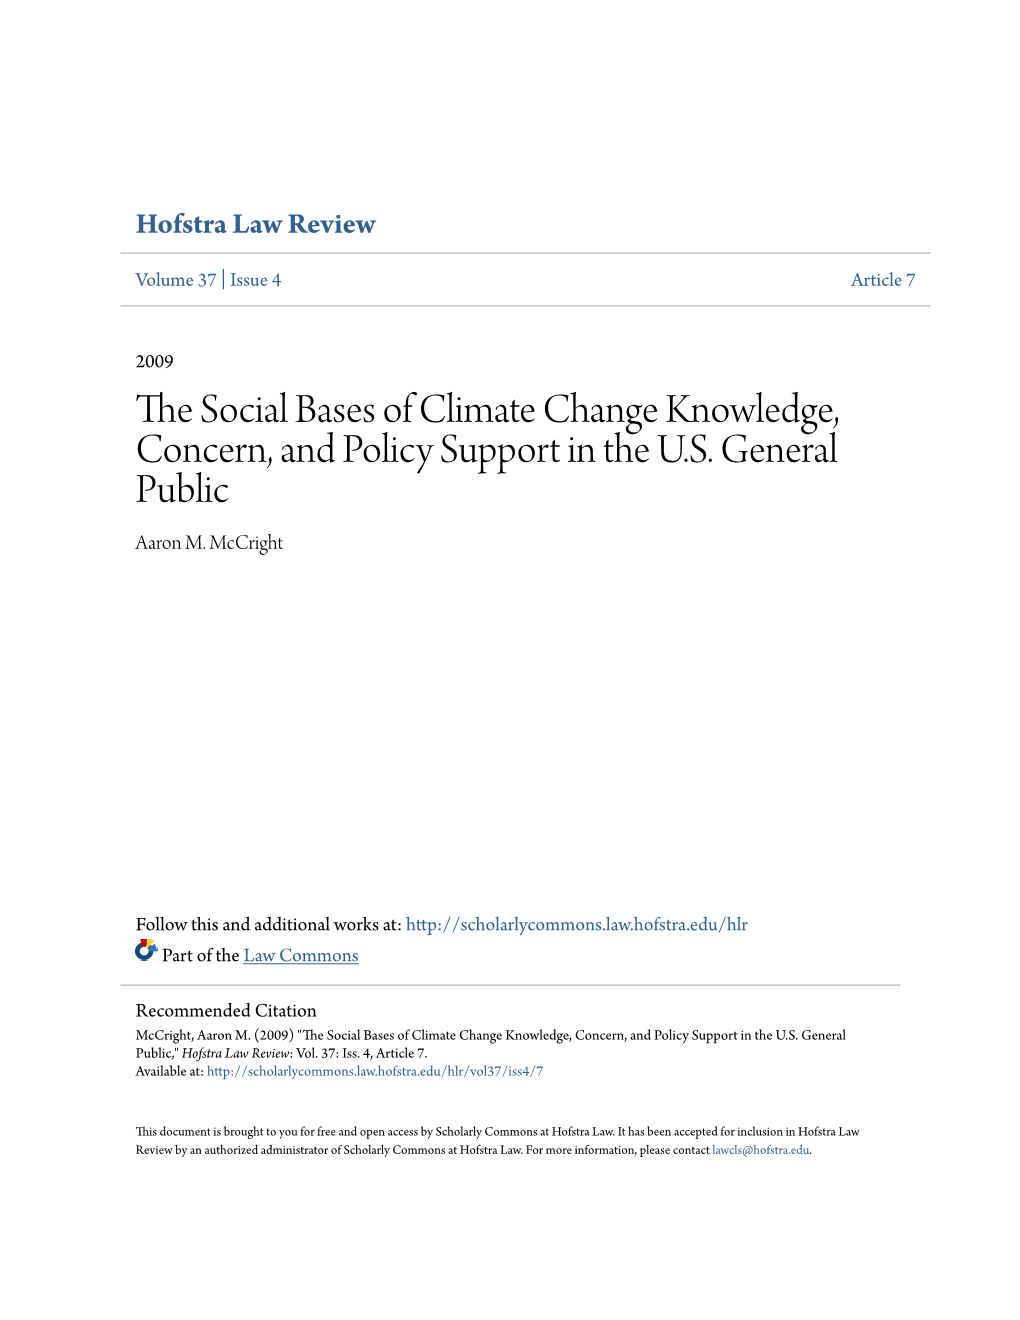 The Social Bases of Climate Change Knowledge, Concern, and Policy